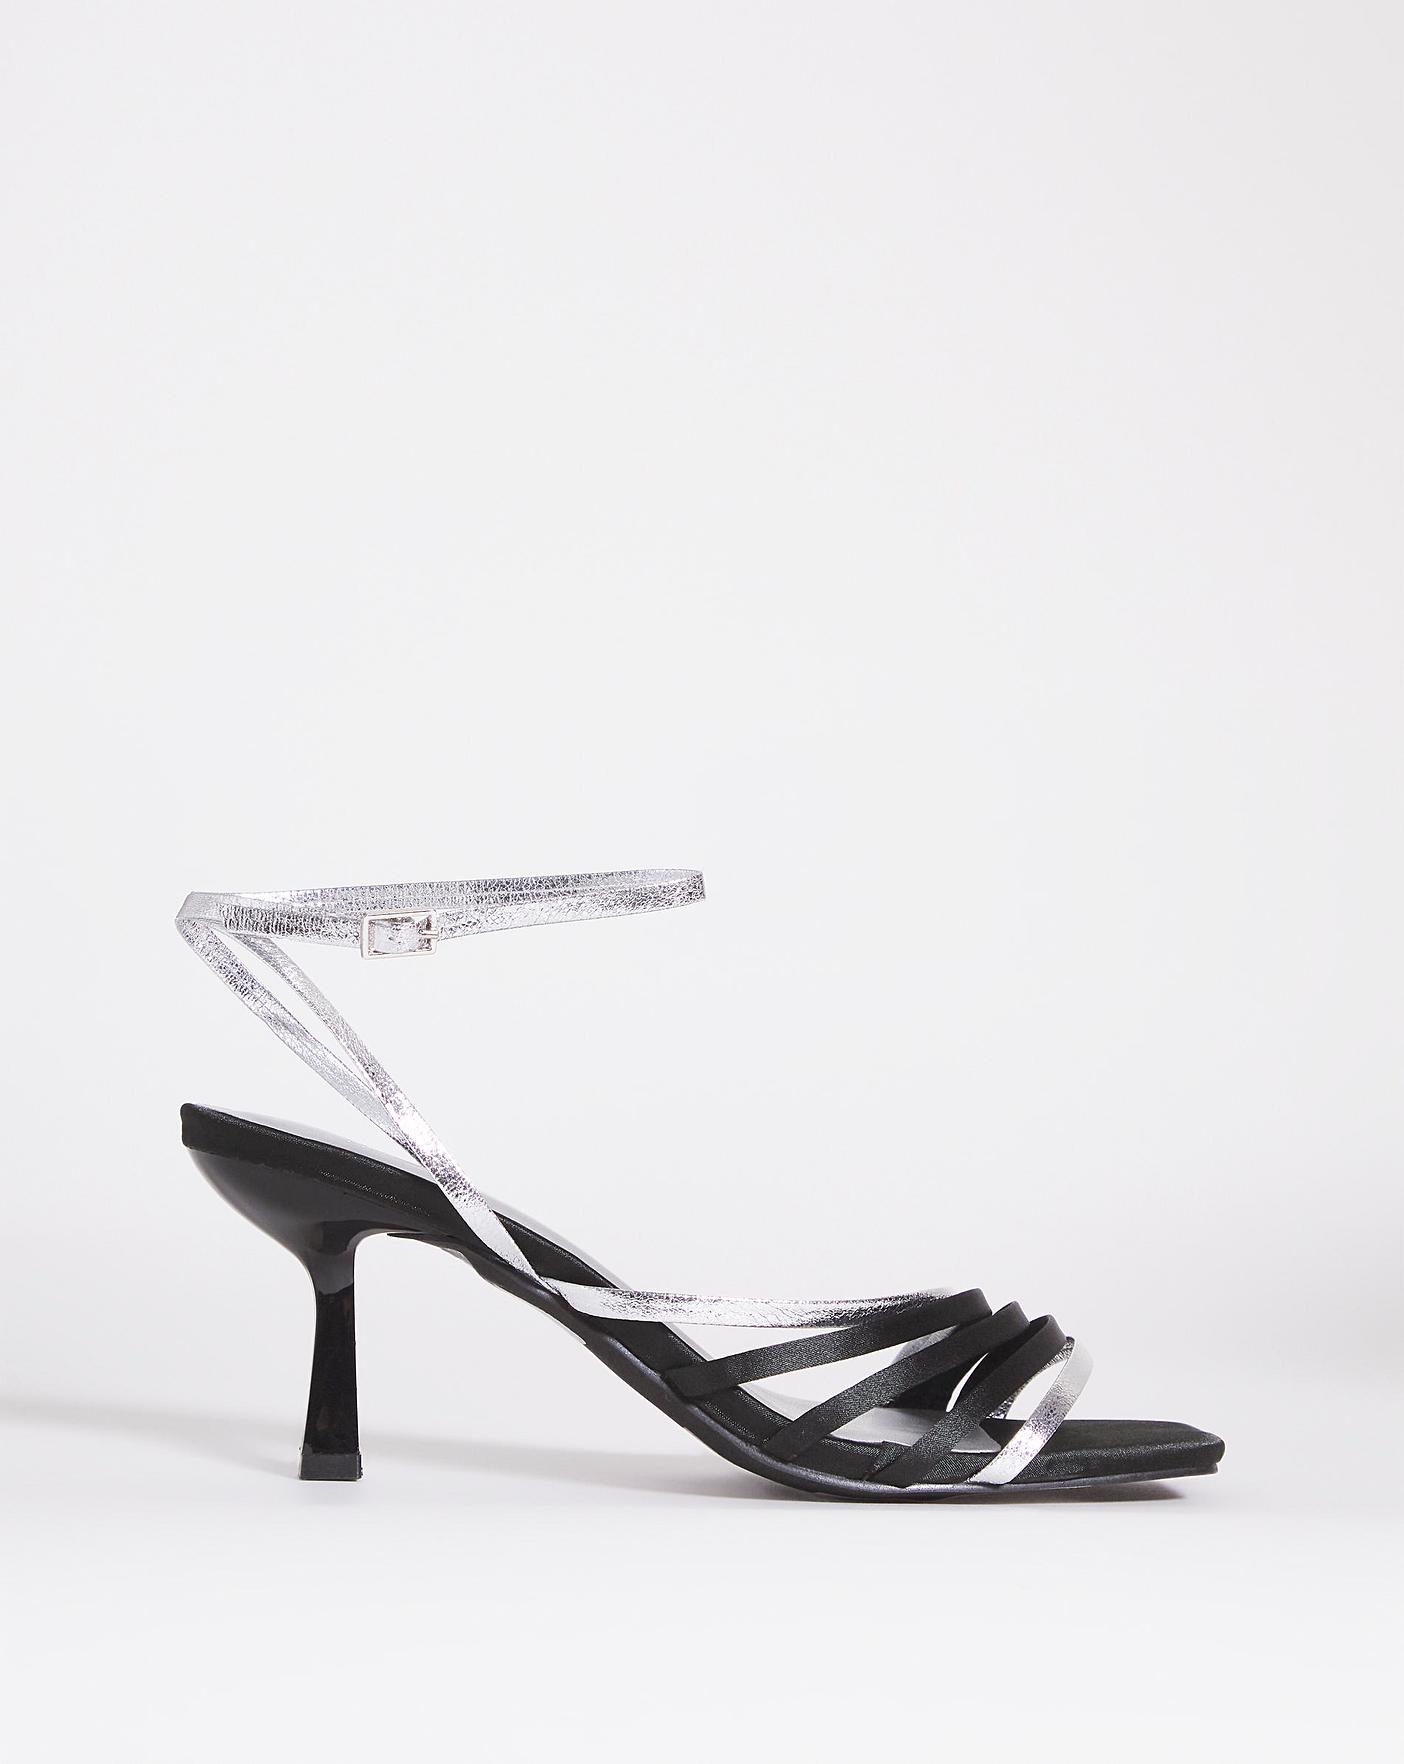 Joanna Hope Strappy Crossover Heel E Fit | Ambrose Wilson